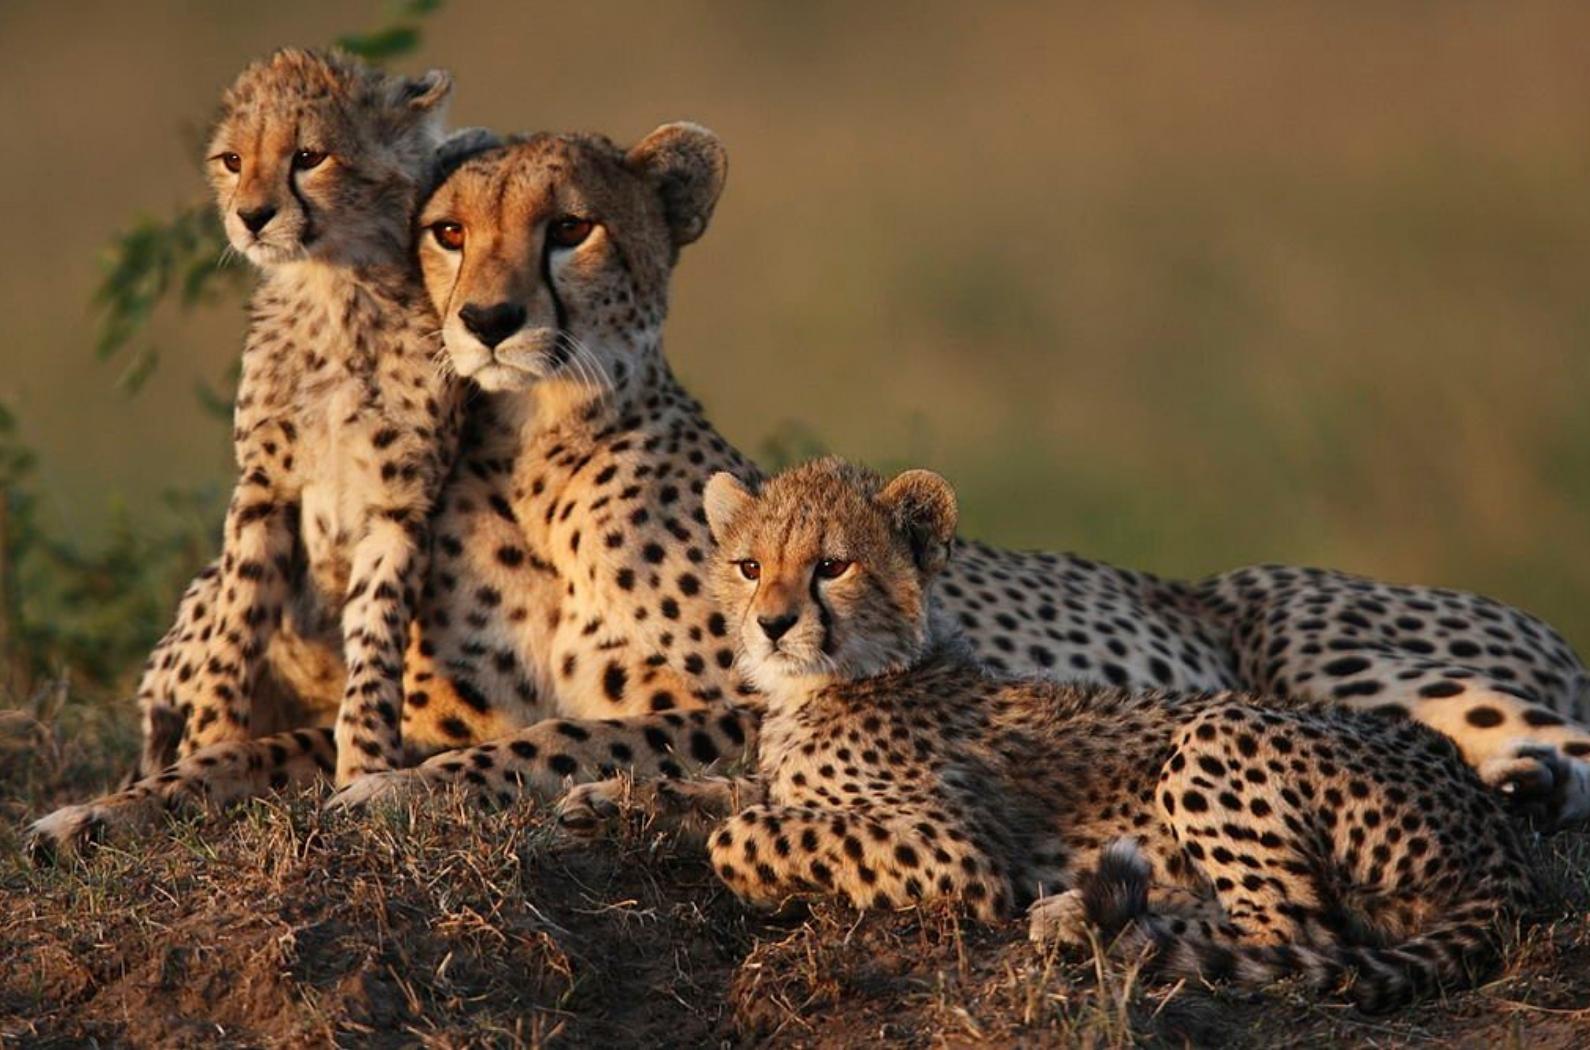 Mother cheetah with two 2 month old cubs on a termite mound.